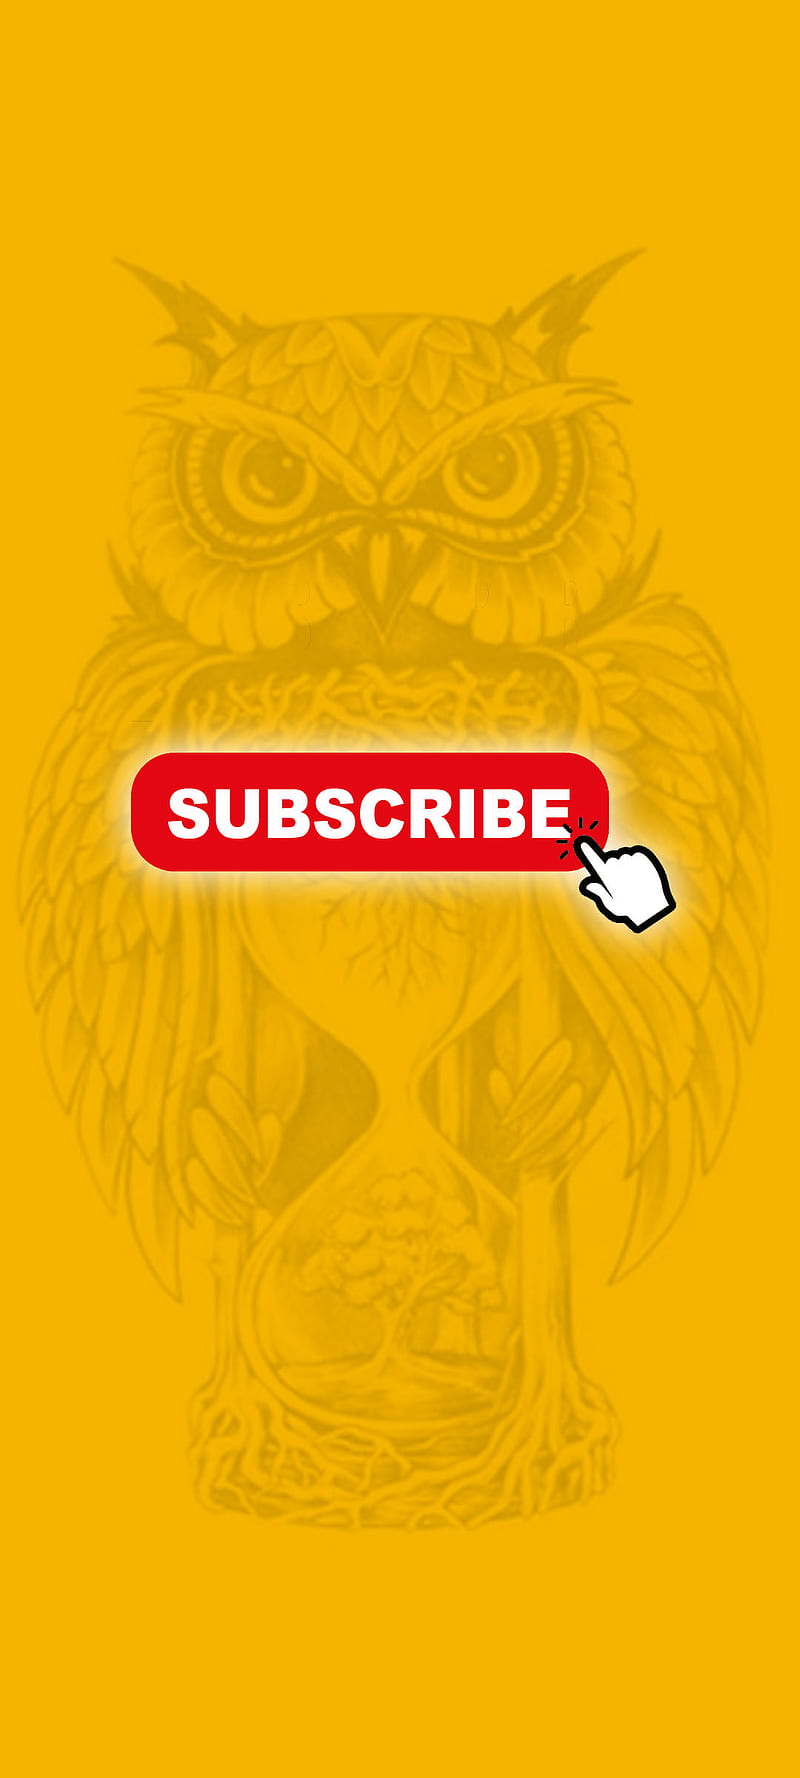 HD subscribe wallpapers | Peakpx